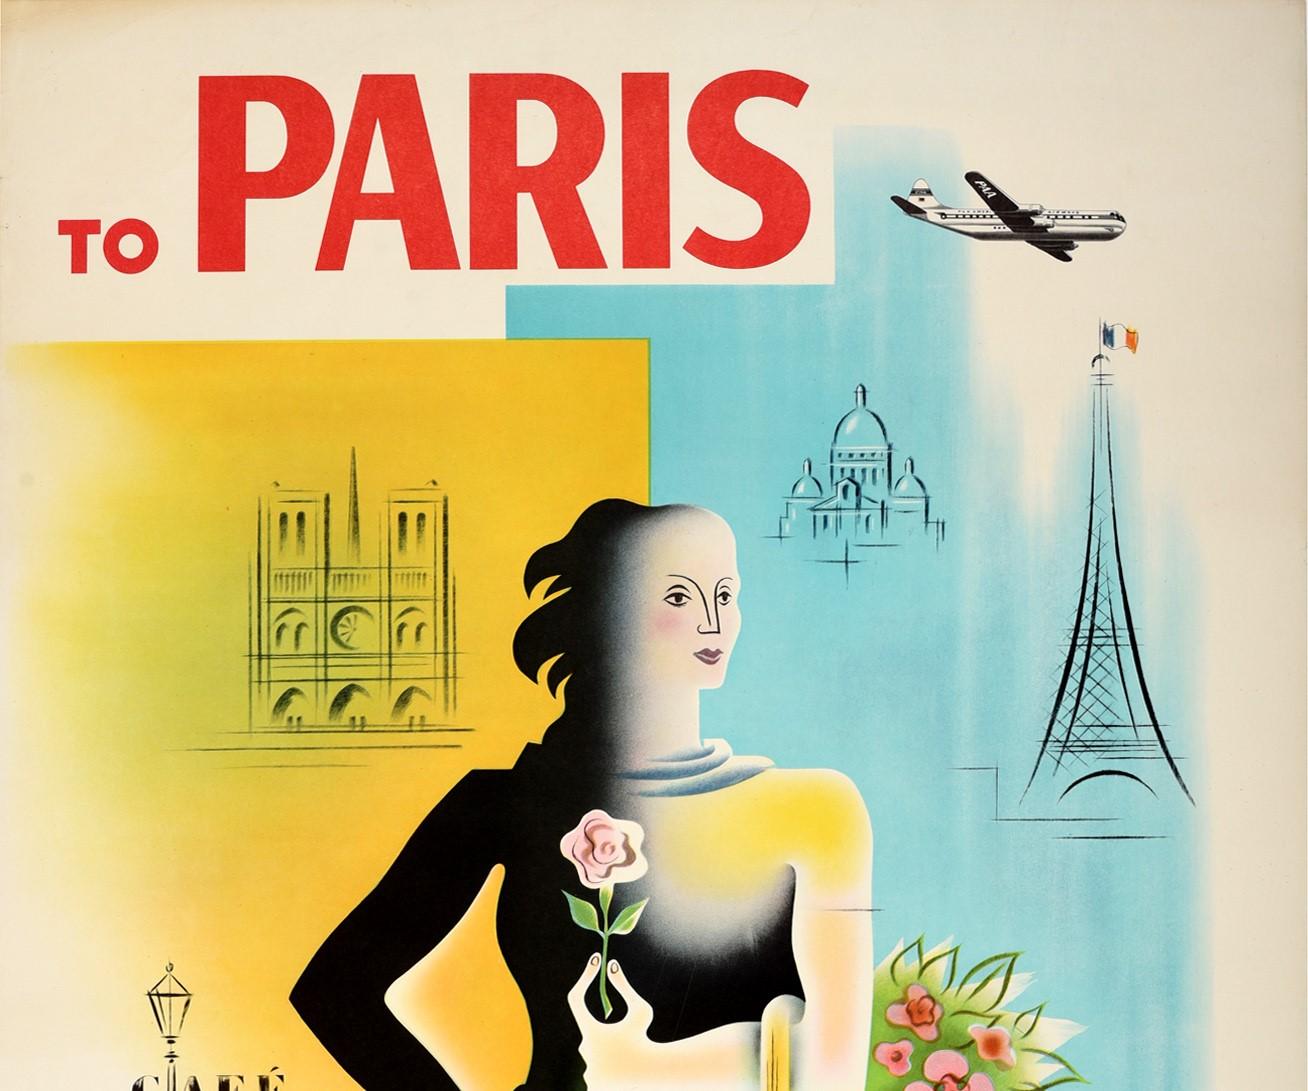 Original vintage travel poster - To Paris Pan American World's Most Experienced Airline - featuring a colourful design by Jean Carlu (1900-1997) depicting a lady holding a basket of flowers and a rose in her hand with illustrations of seating